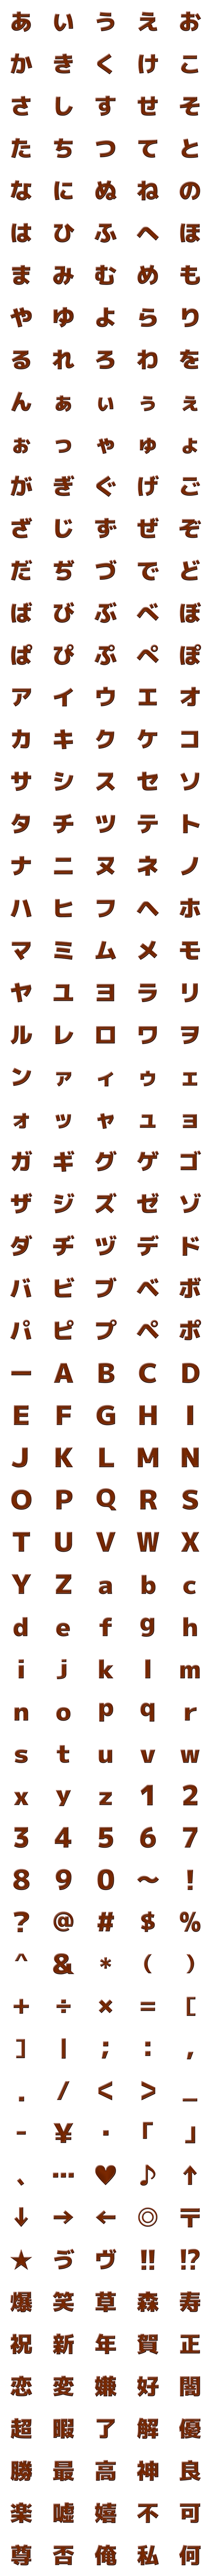 [LINE絵文字]チョコレート風デコ文字 -ゴシック-の画像一覧